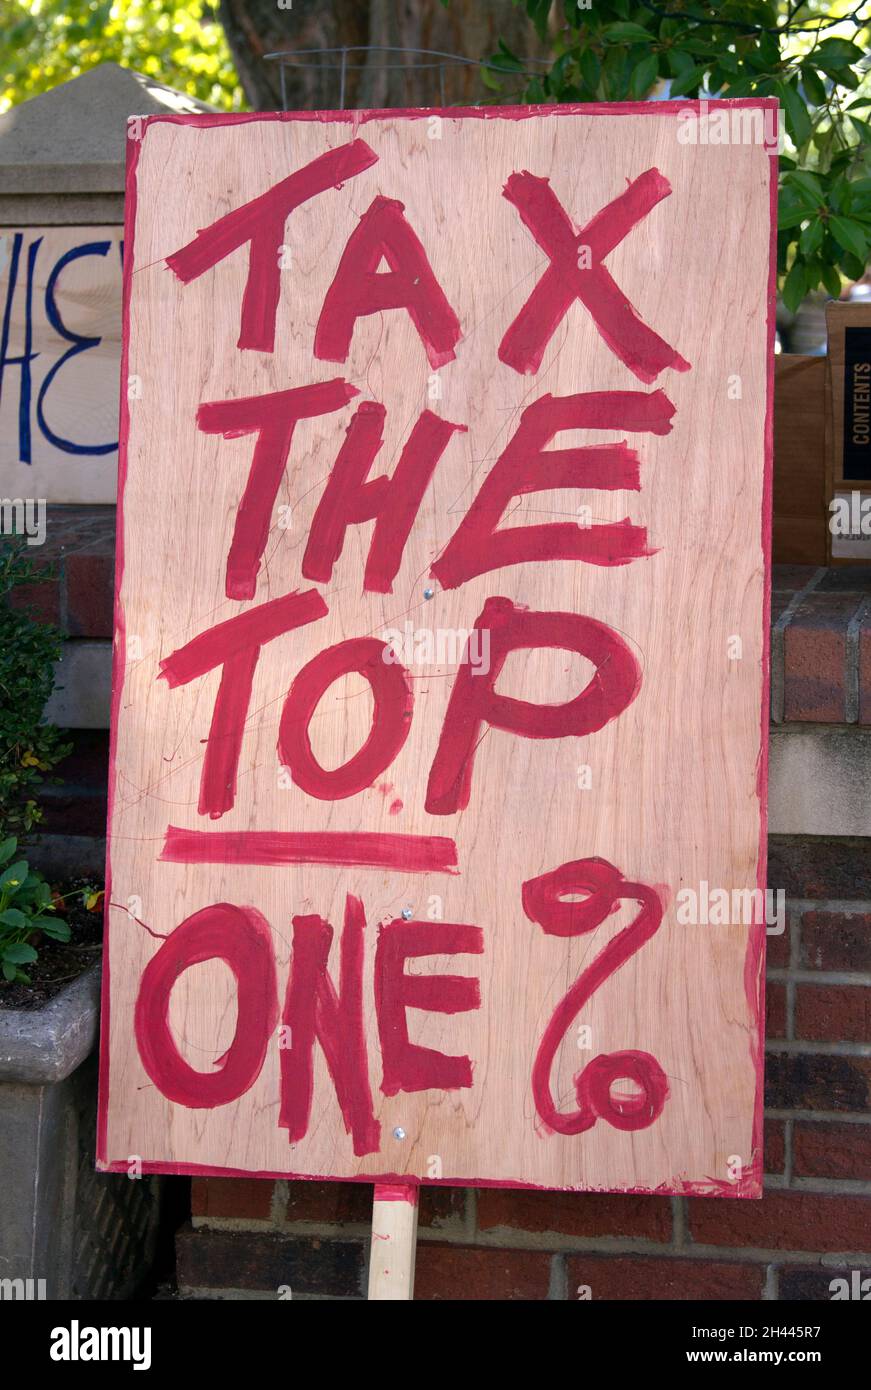 2011 Occupy Wallstreet sign says 'Tax the Top One %' a progressive stance that continues to be debated. Stock Photo